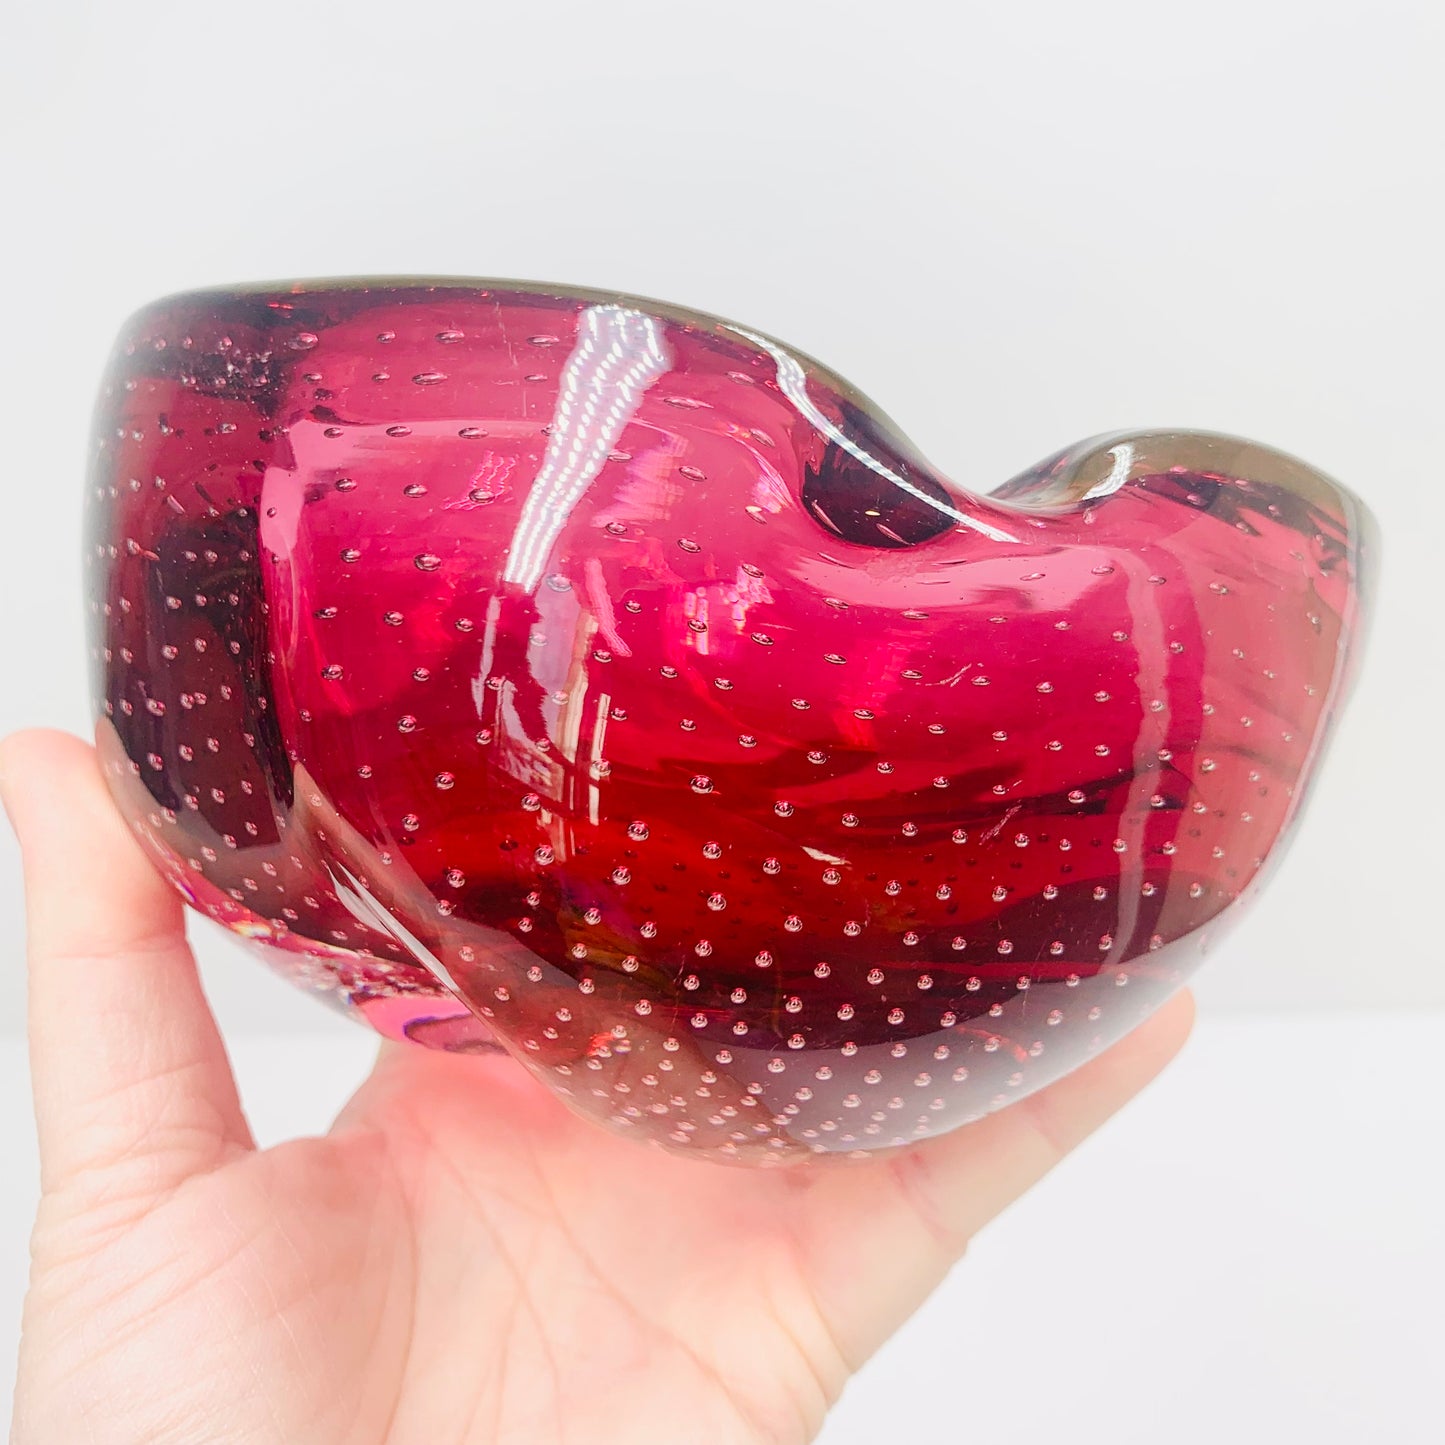 Stunning and rare MCM Murano pink glass ashtray/bon bon with controlled bubbles